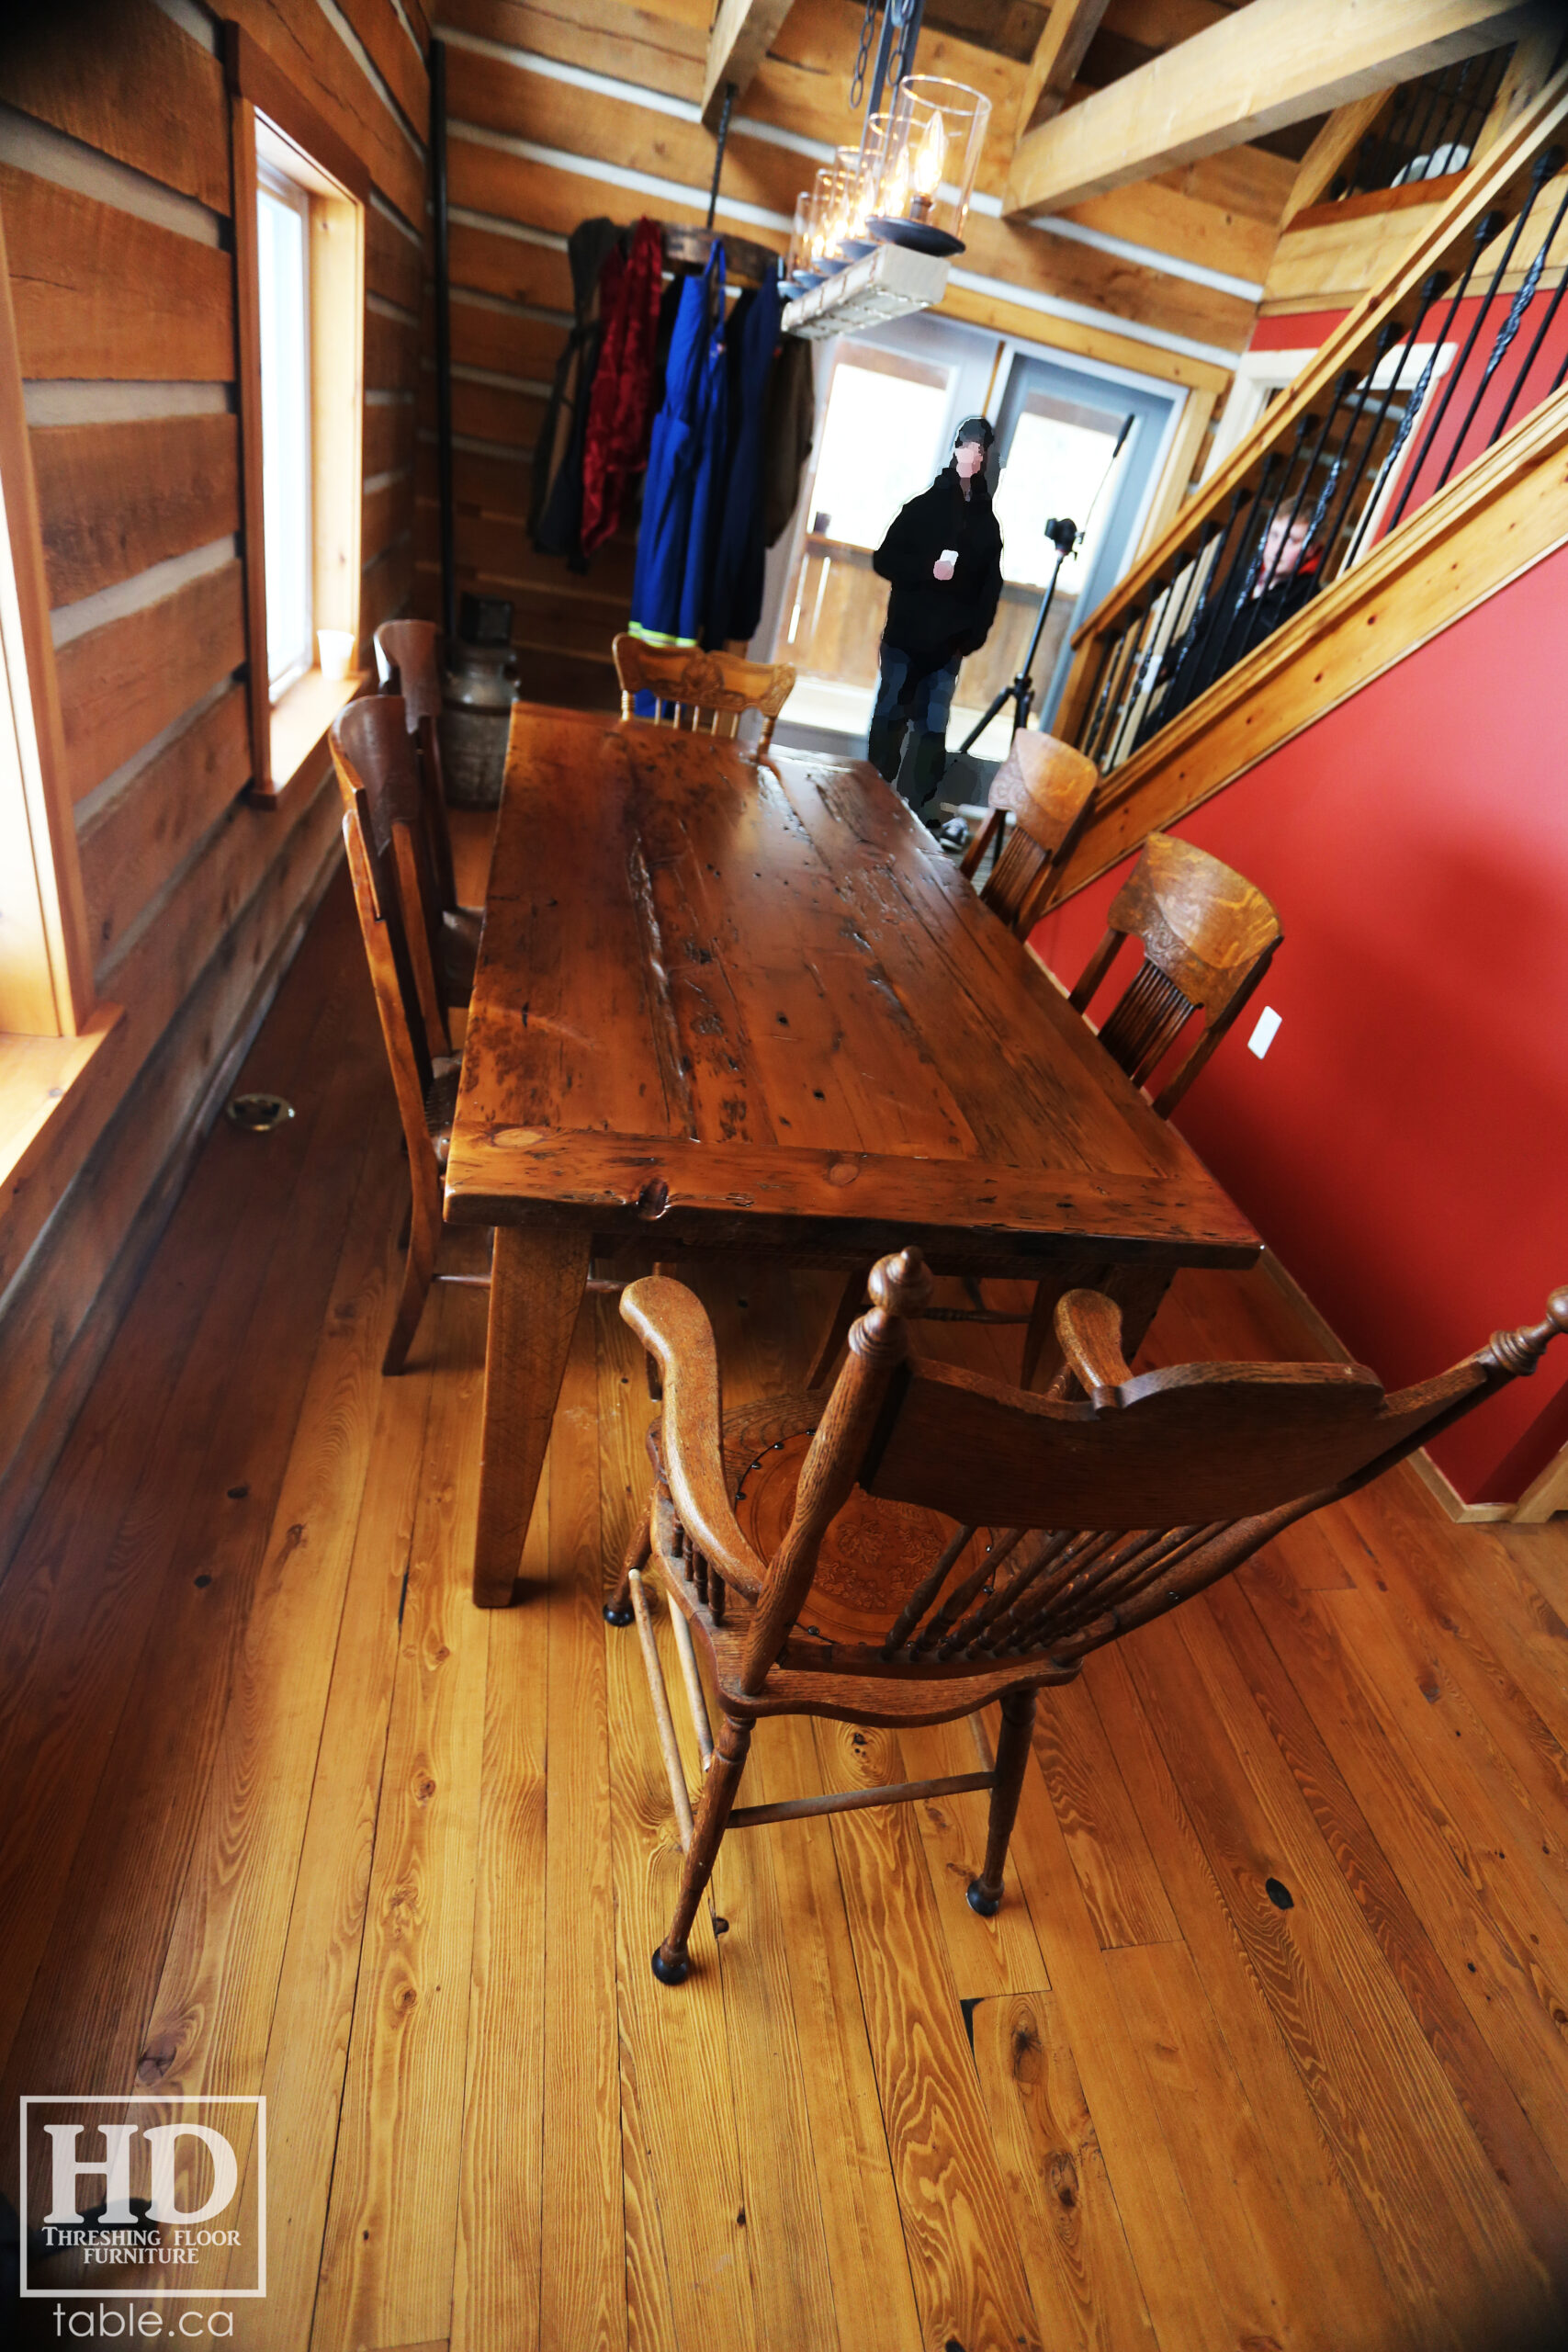 Cottage Harvest Table by HD Threshing Floor Furniture / www.table.ca